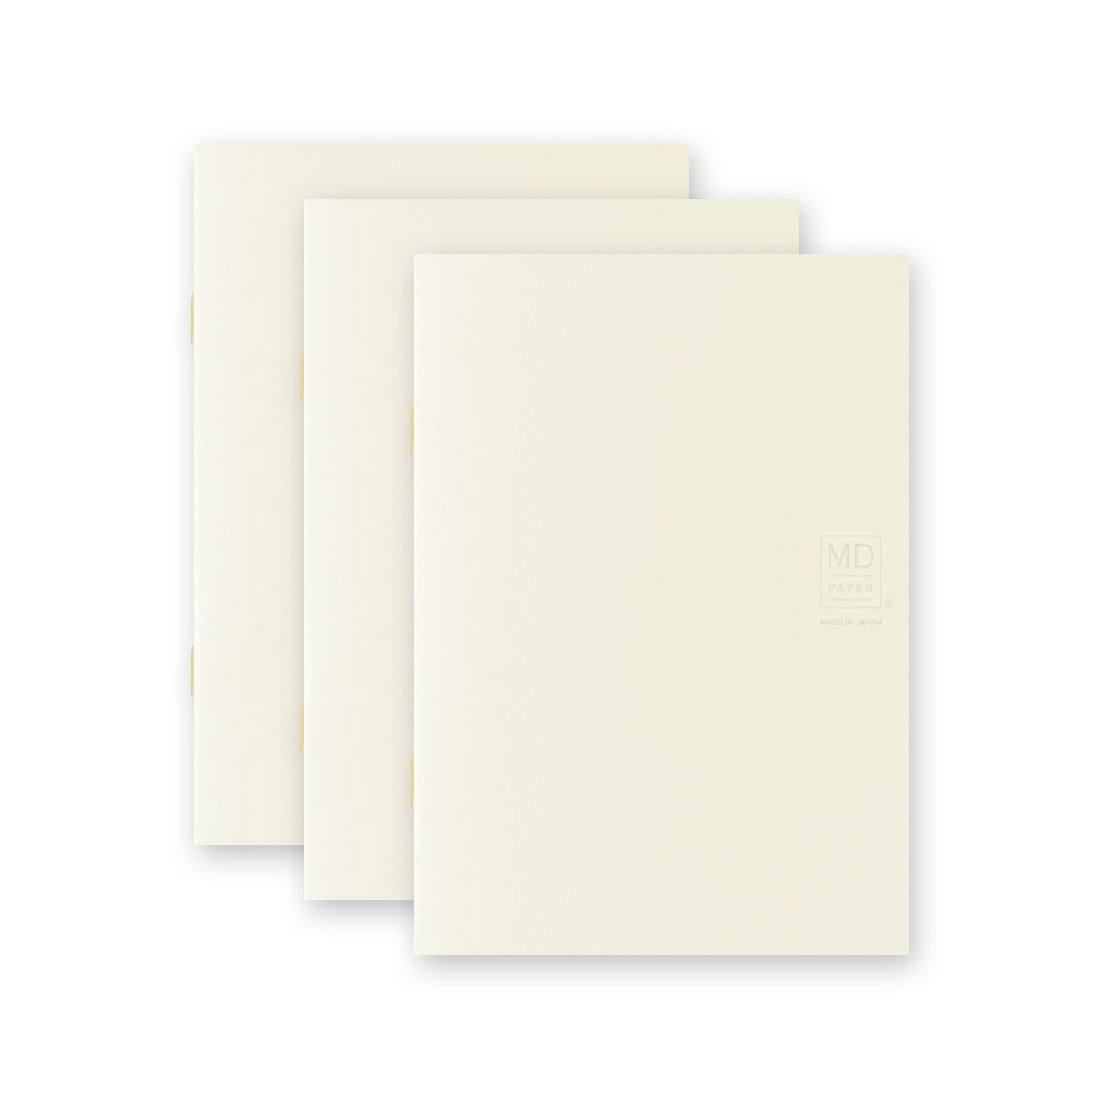 Midori MD Notebook Light A6 148x105mm, Blank, 3pcs pack, Label stickers, Saddle Stitched, 48 pages each, 15297006